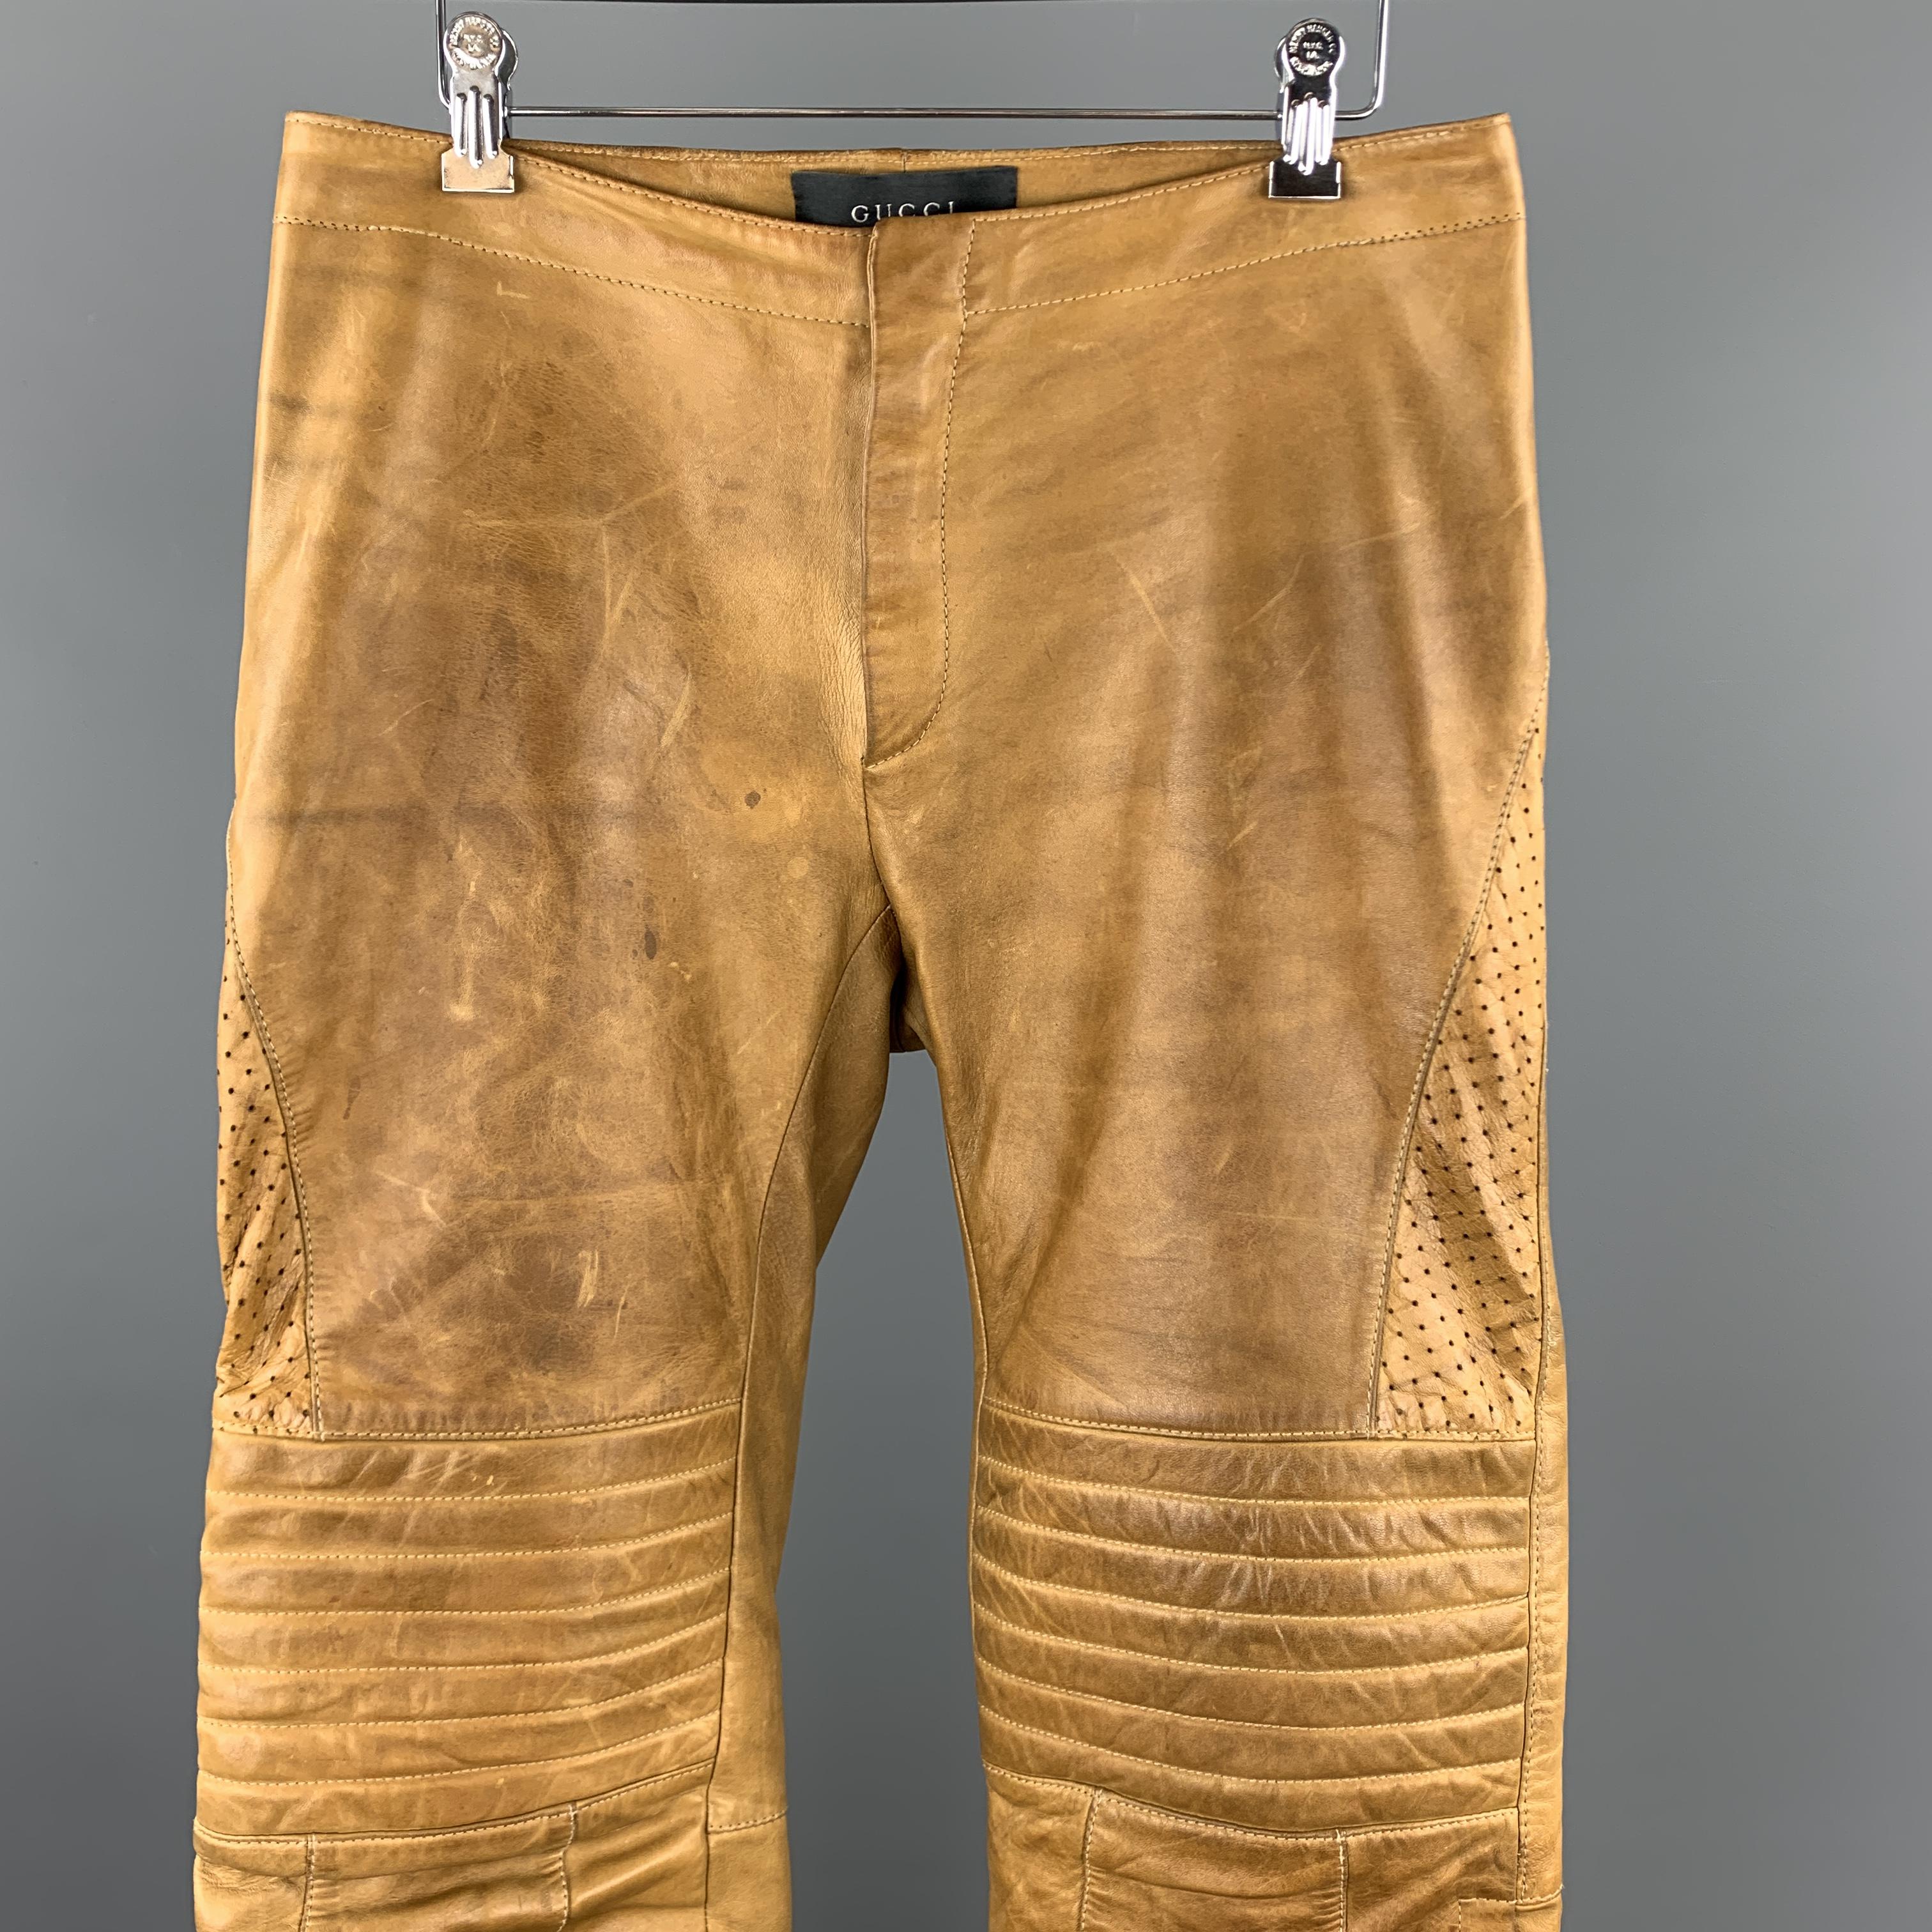 Archive early 2000s GUCCI by TOM FORD biker style pants come in soft tan leather with a zip fly, perforated side panels, quilted knee pads, and zip and tab hems. Wear throughout leather and liner damaged. As-is. Made in Italy.

Good Pre-Owned